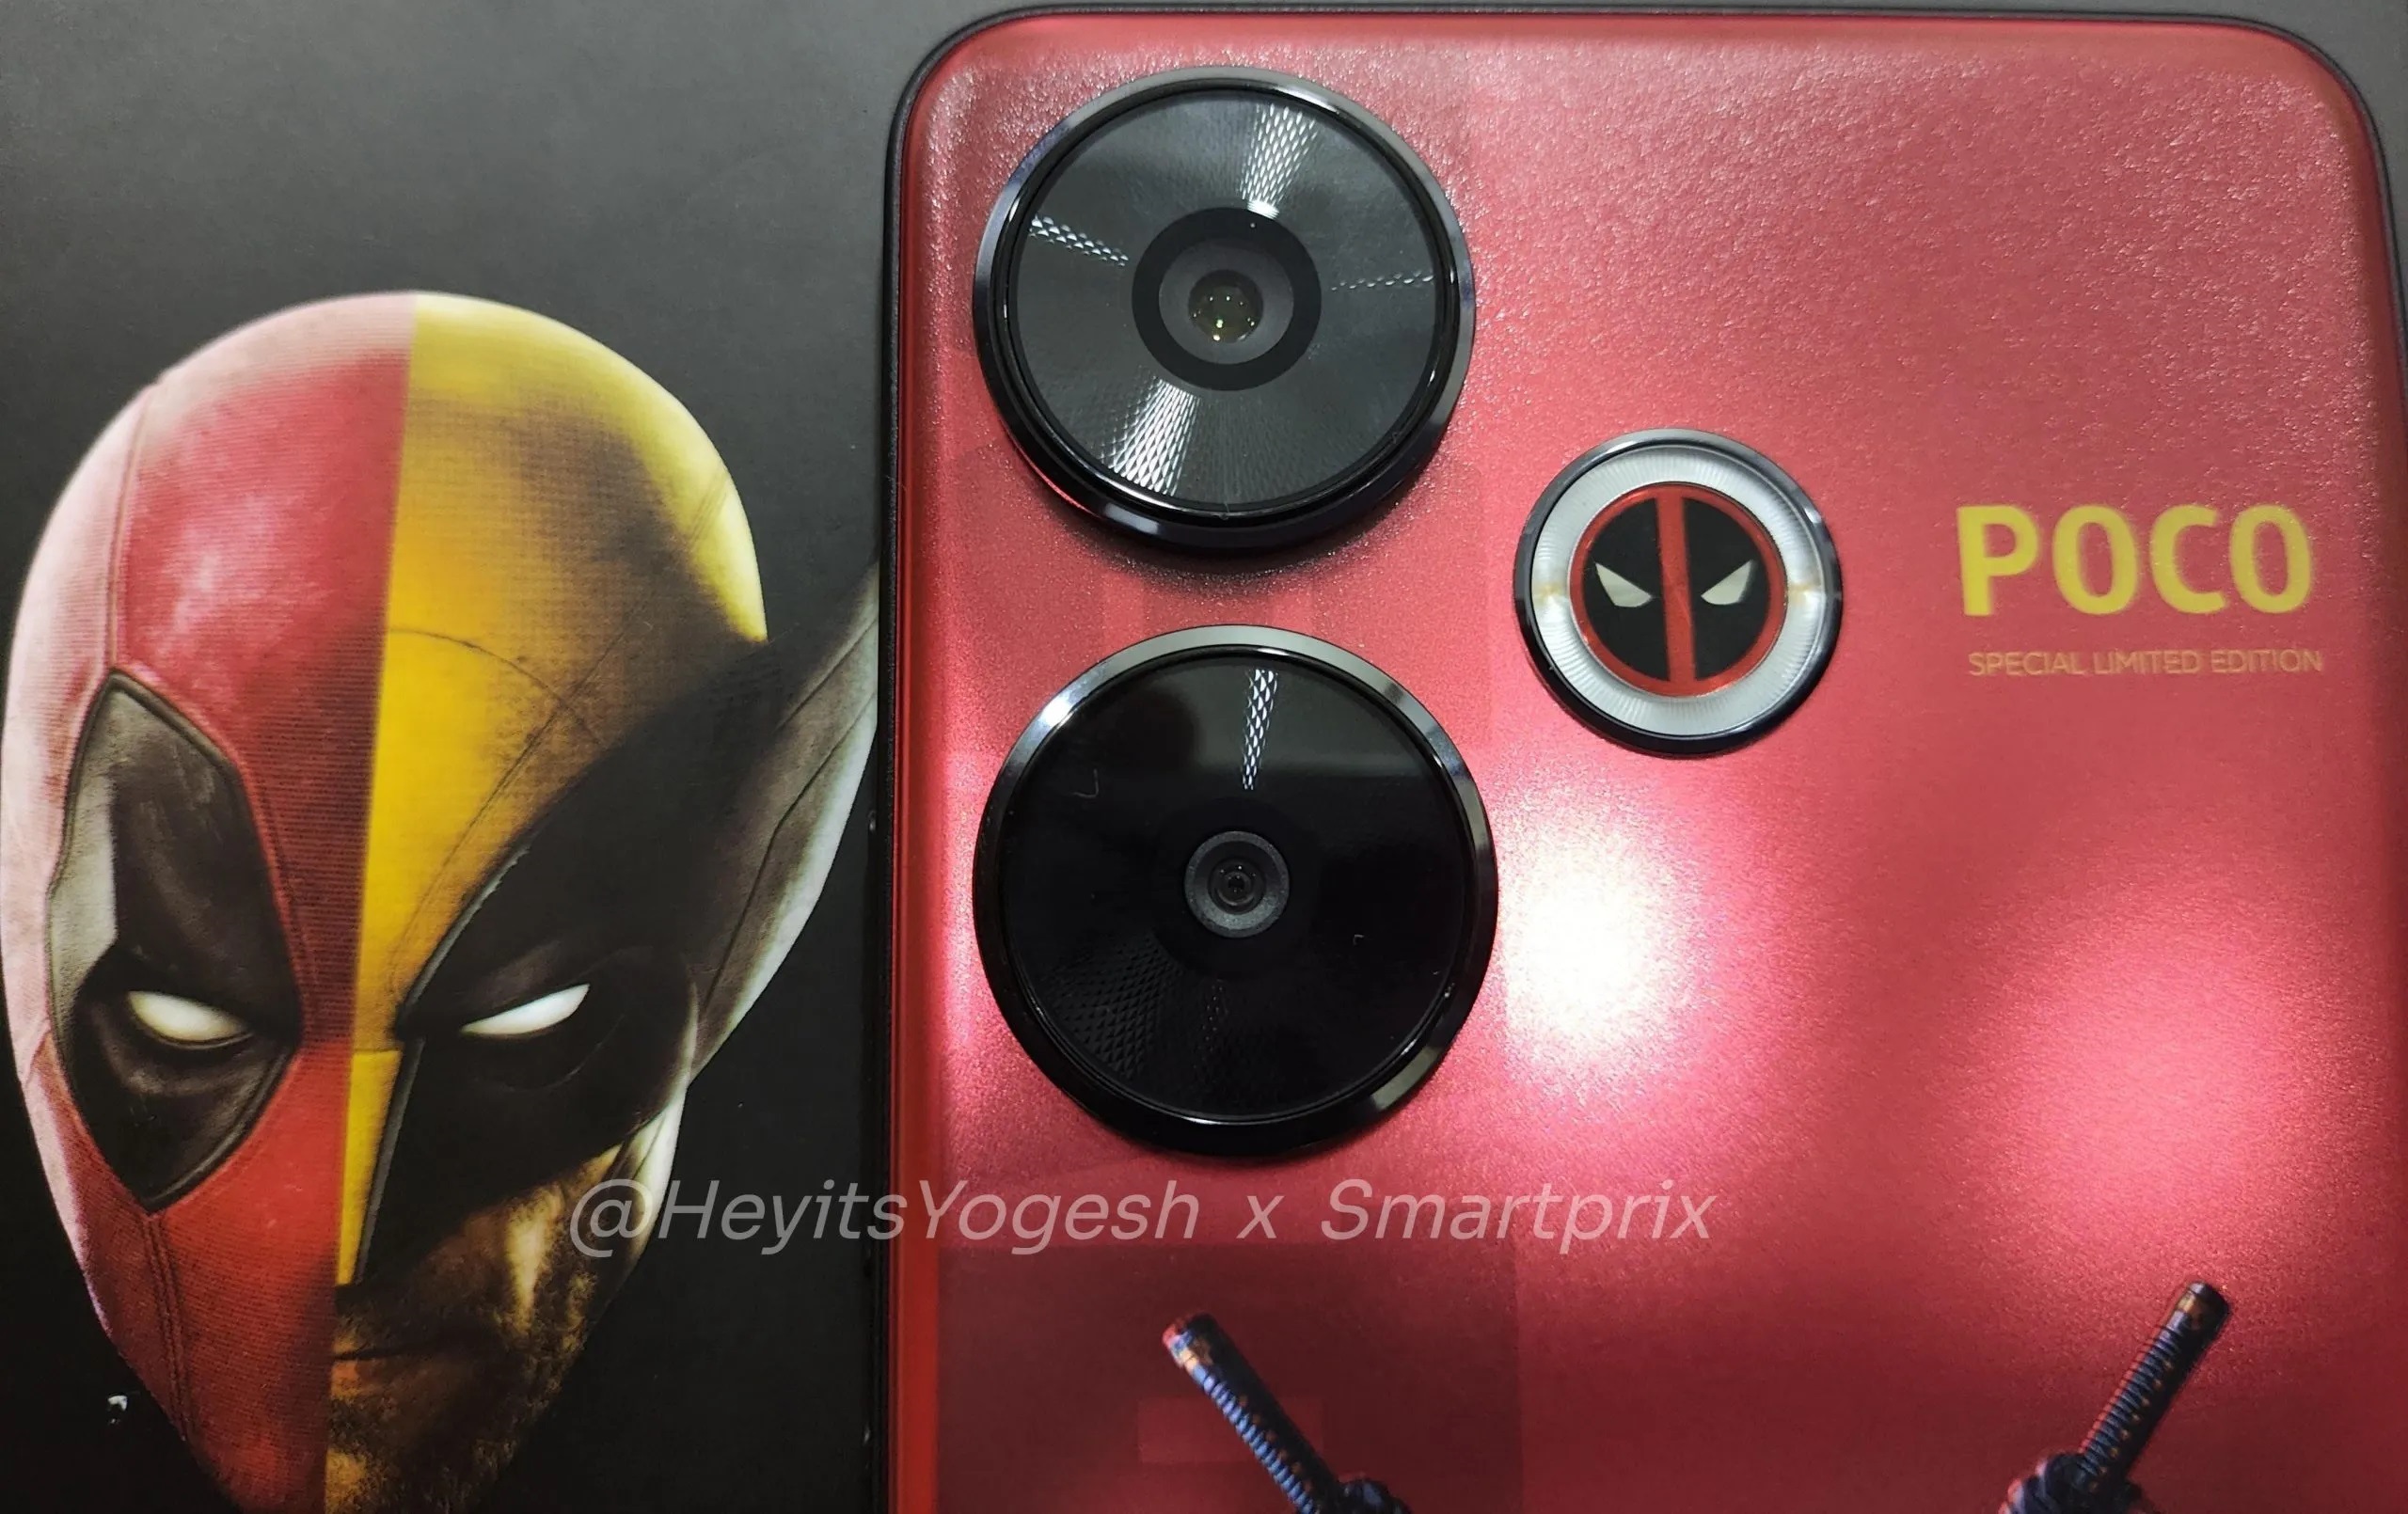 The first image of the exclusive POCO Deadpool Edition smartphone, which will be announced as early as 26 July, has surfaced